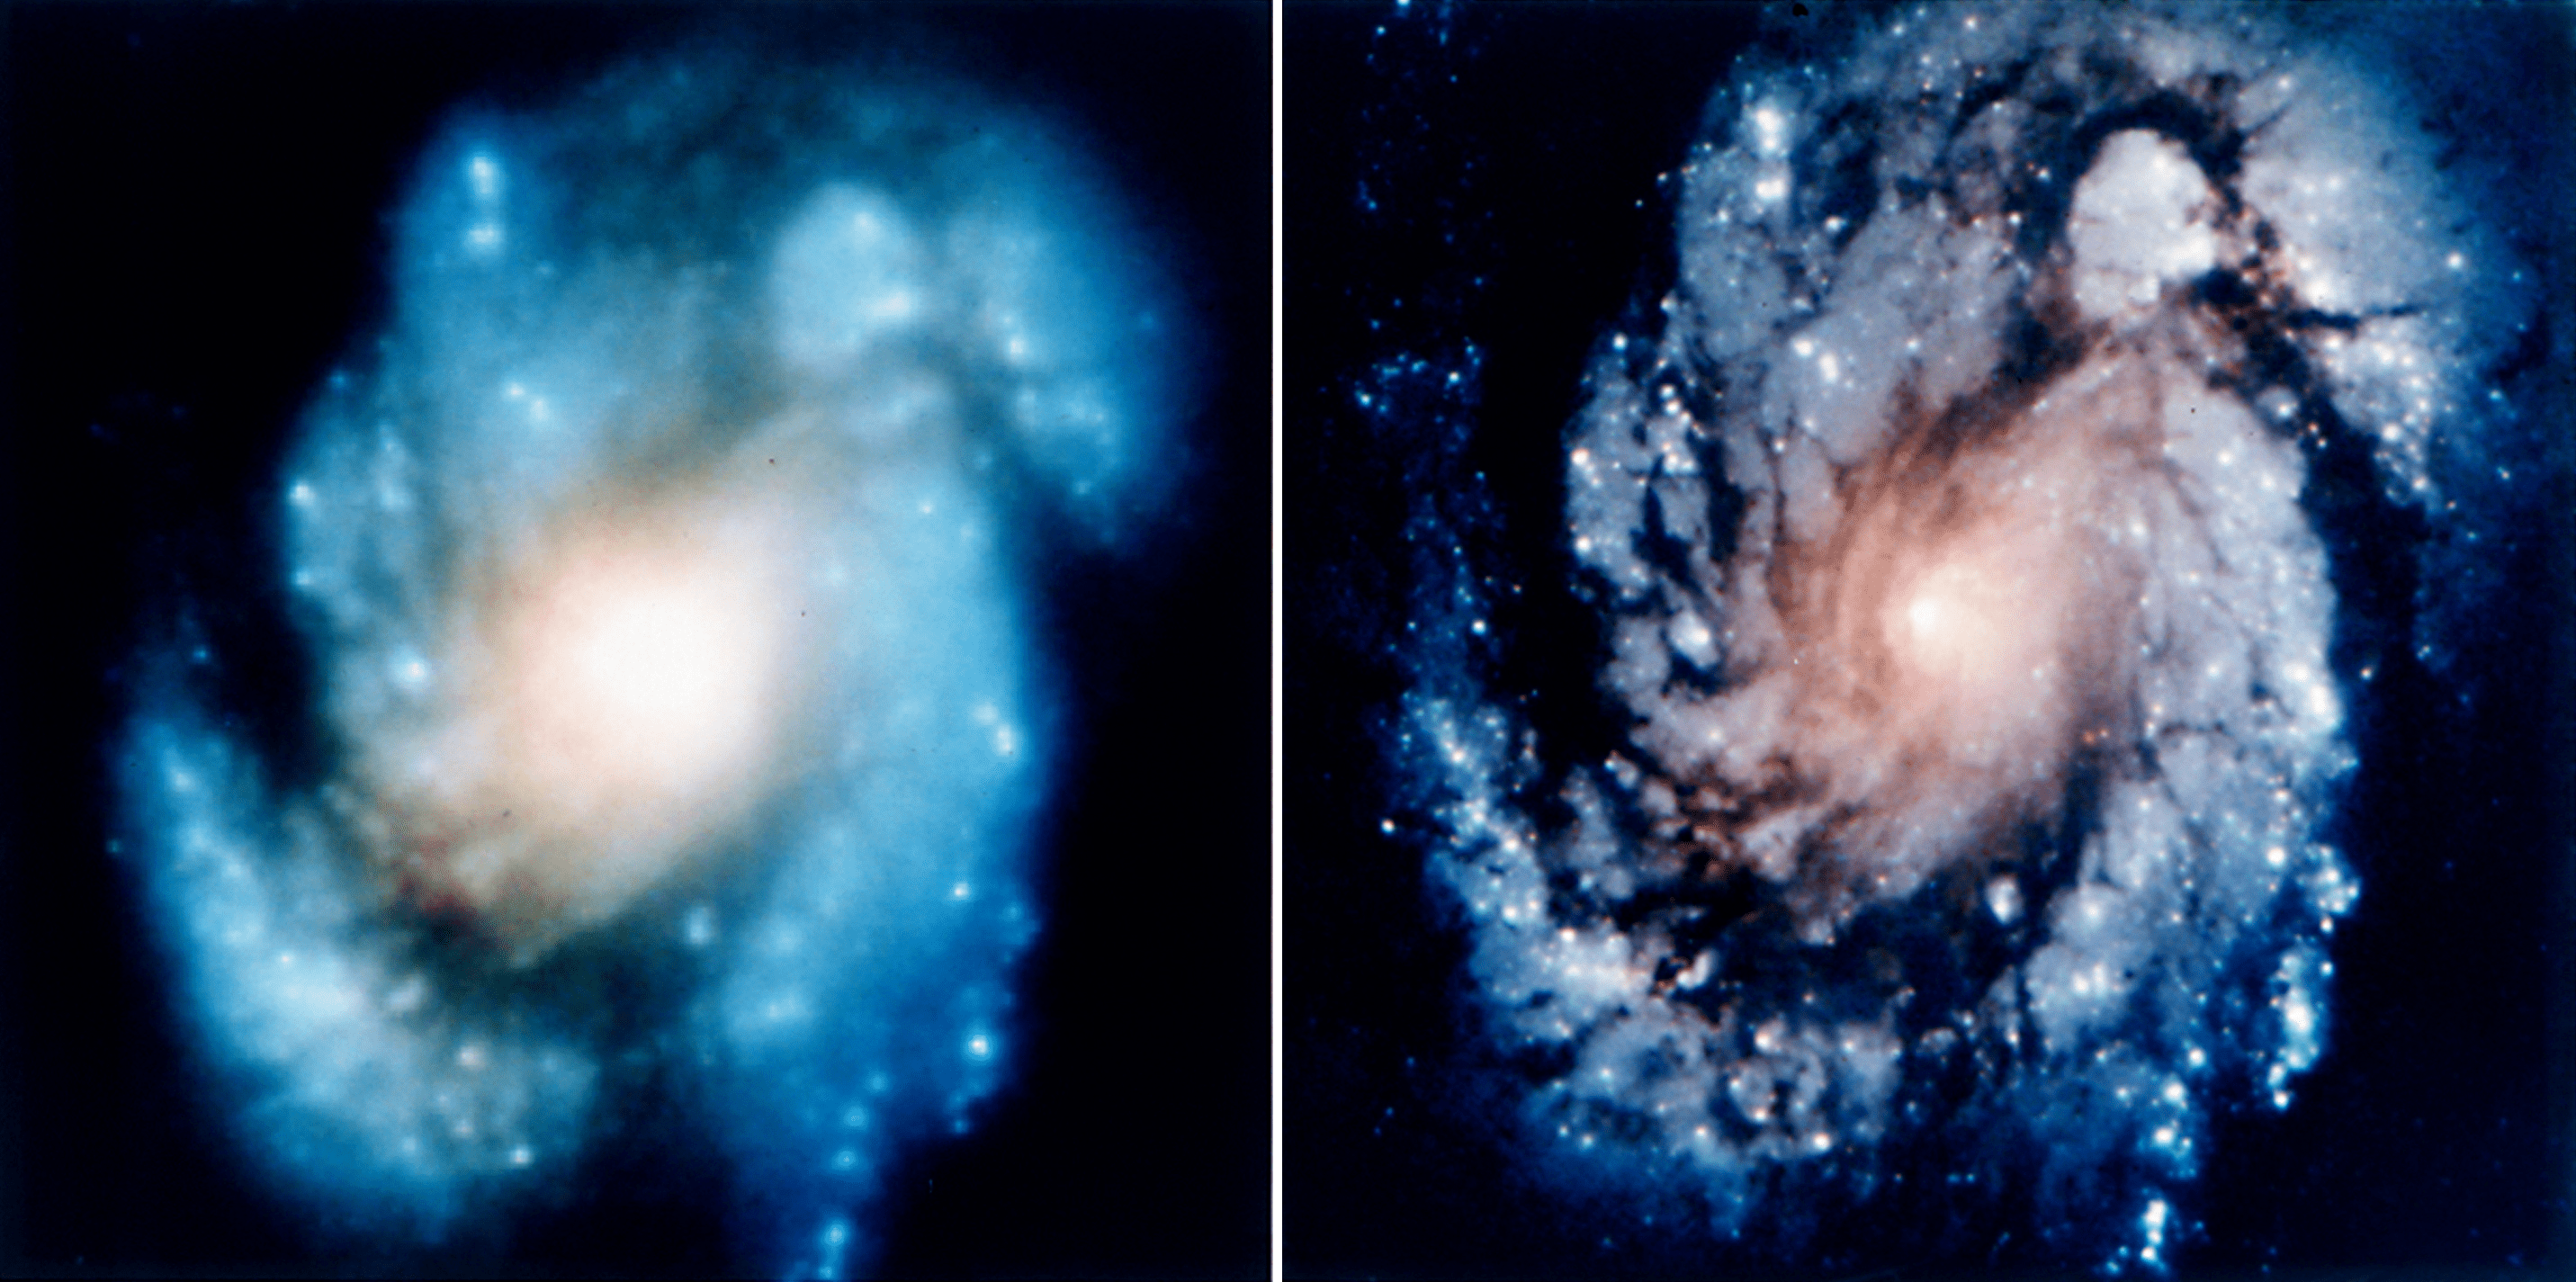 blurry and clear images of galaxy